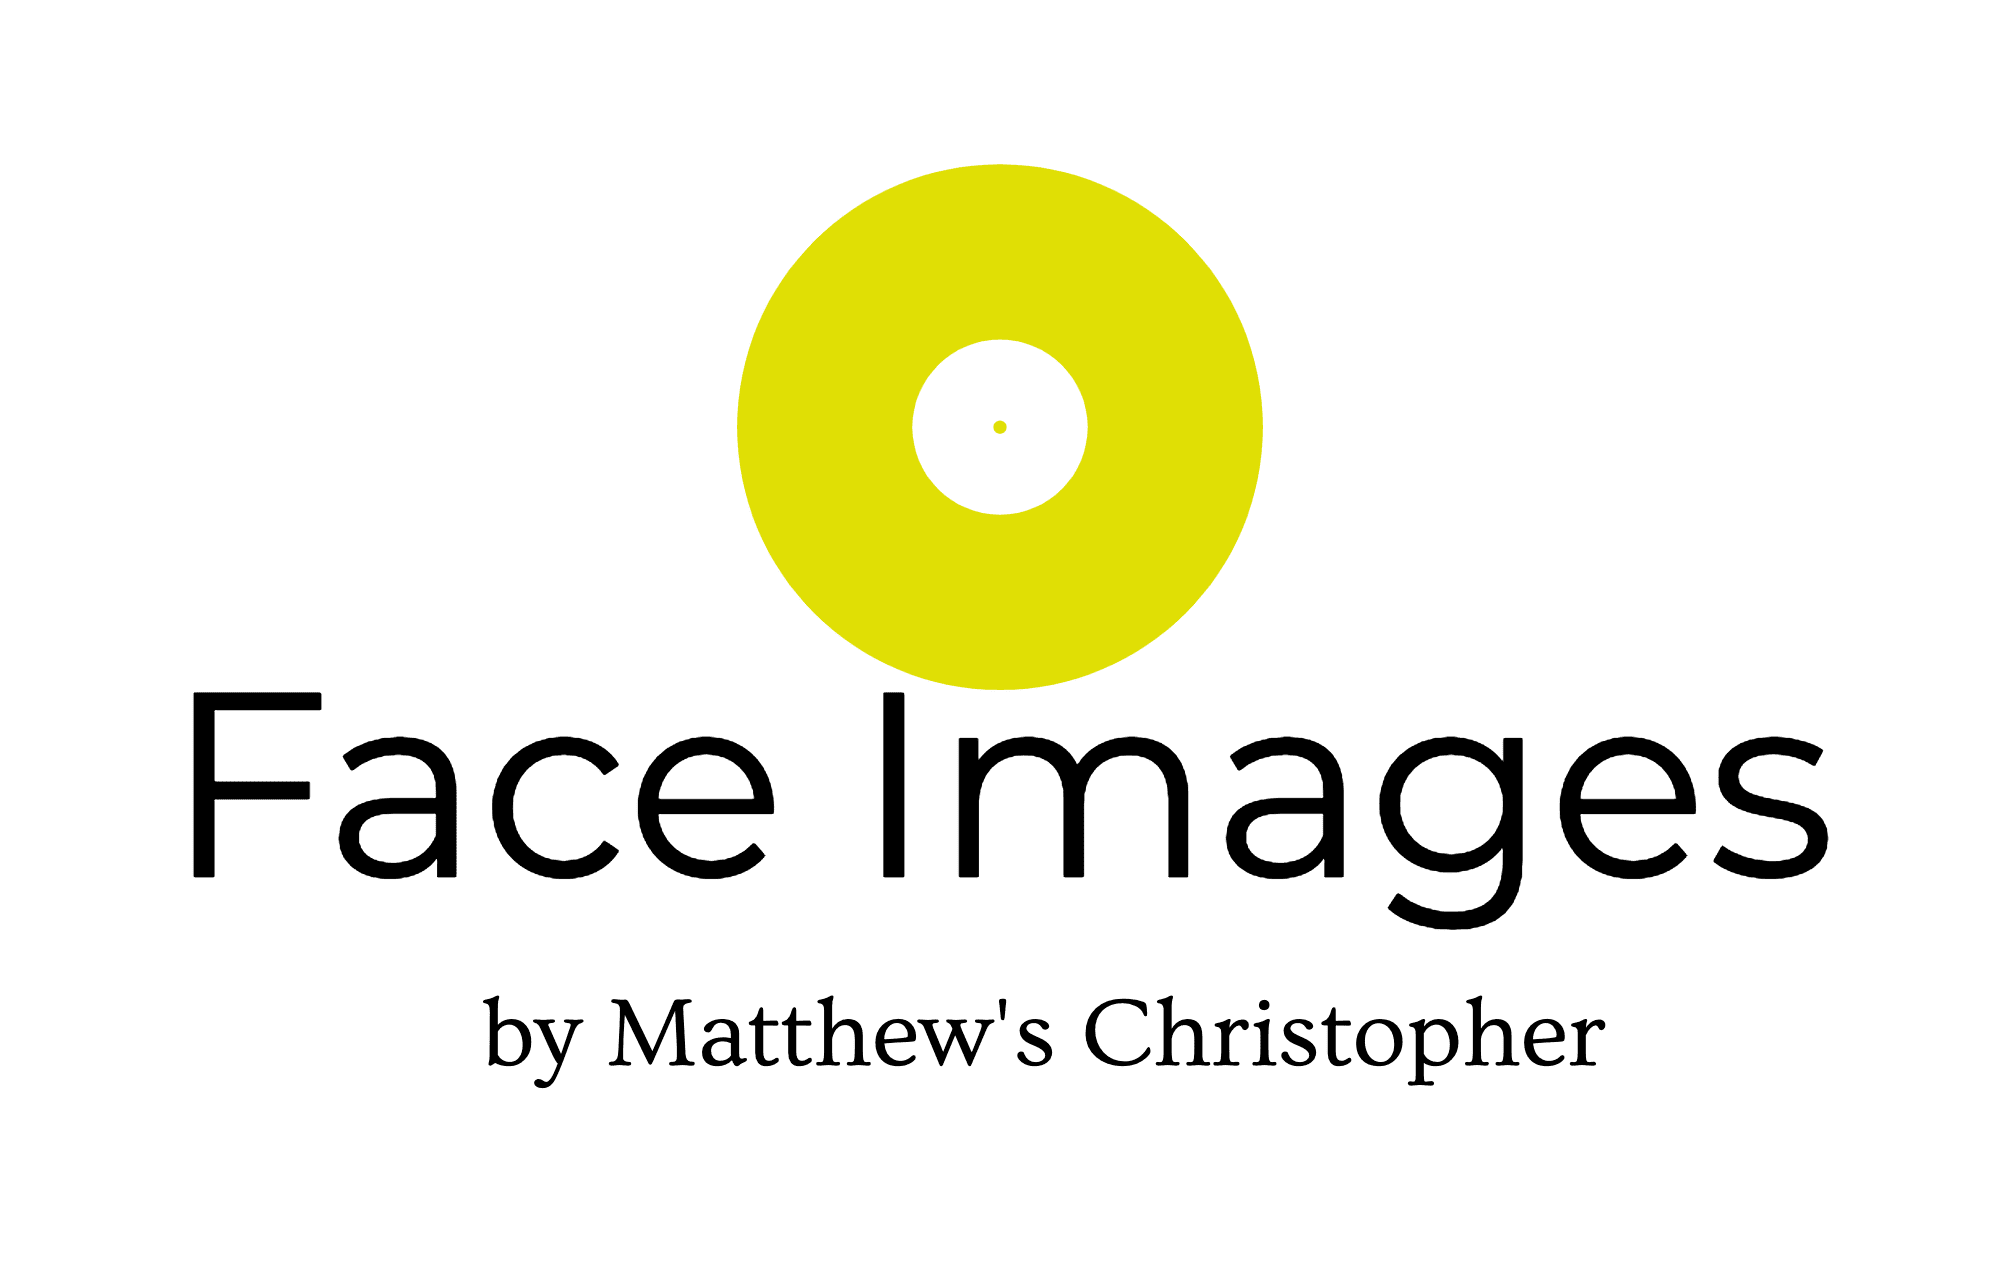 Face Images by Matthew's Christopher